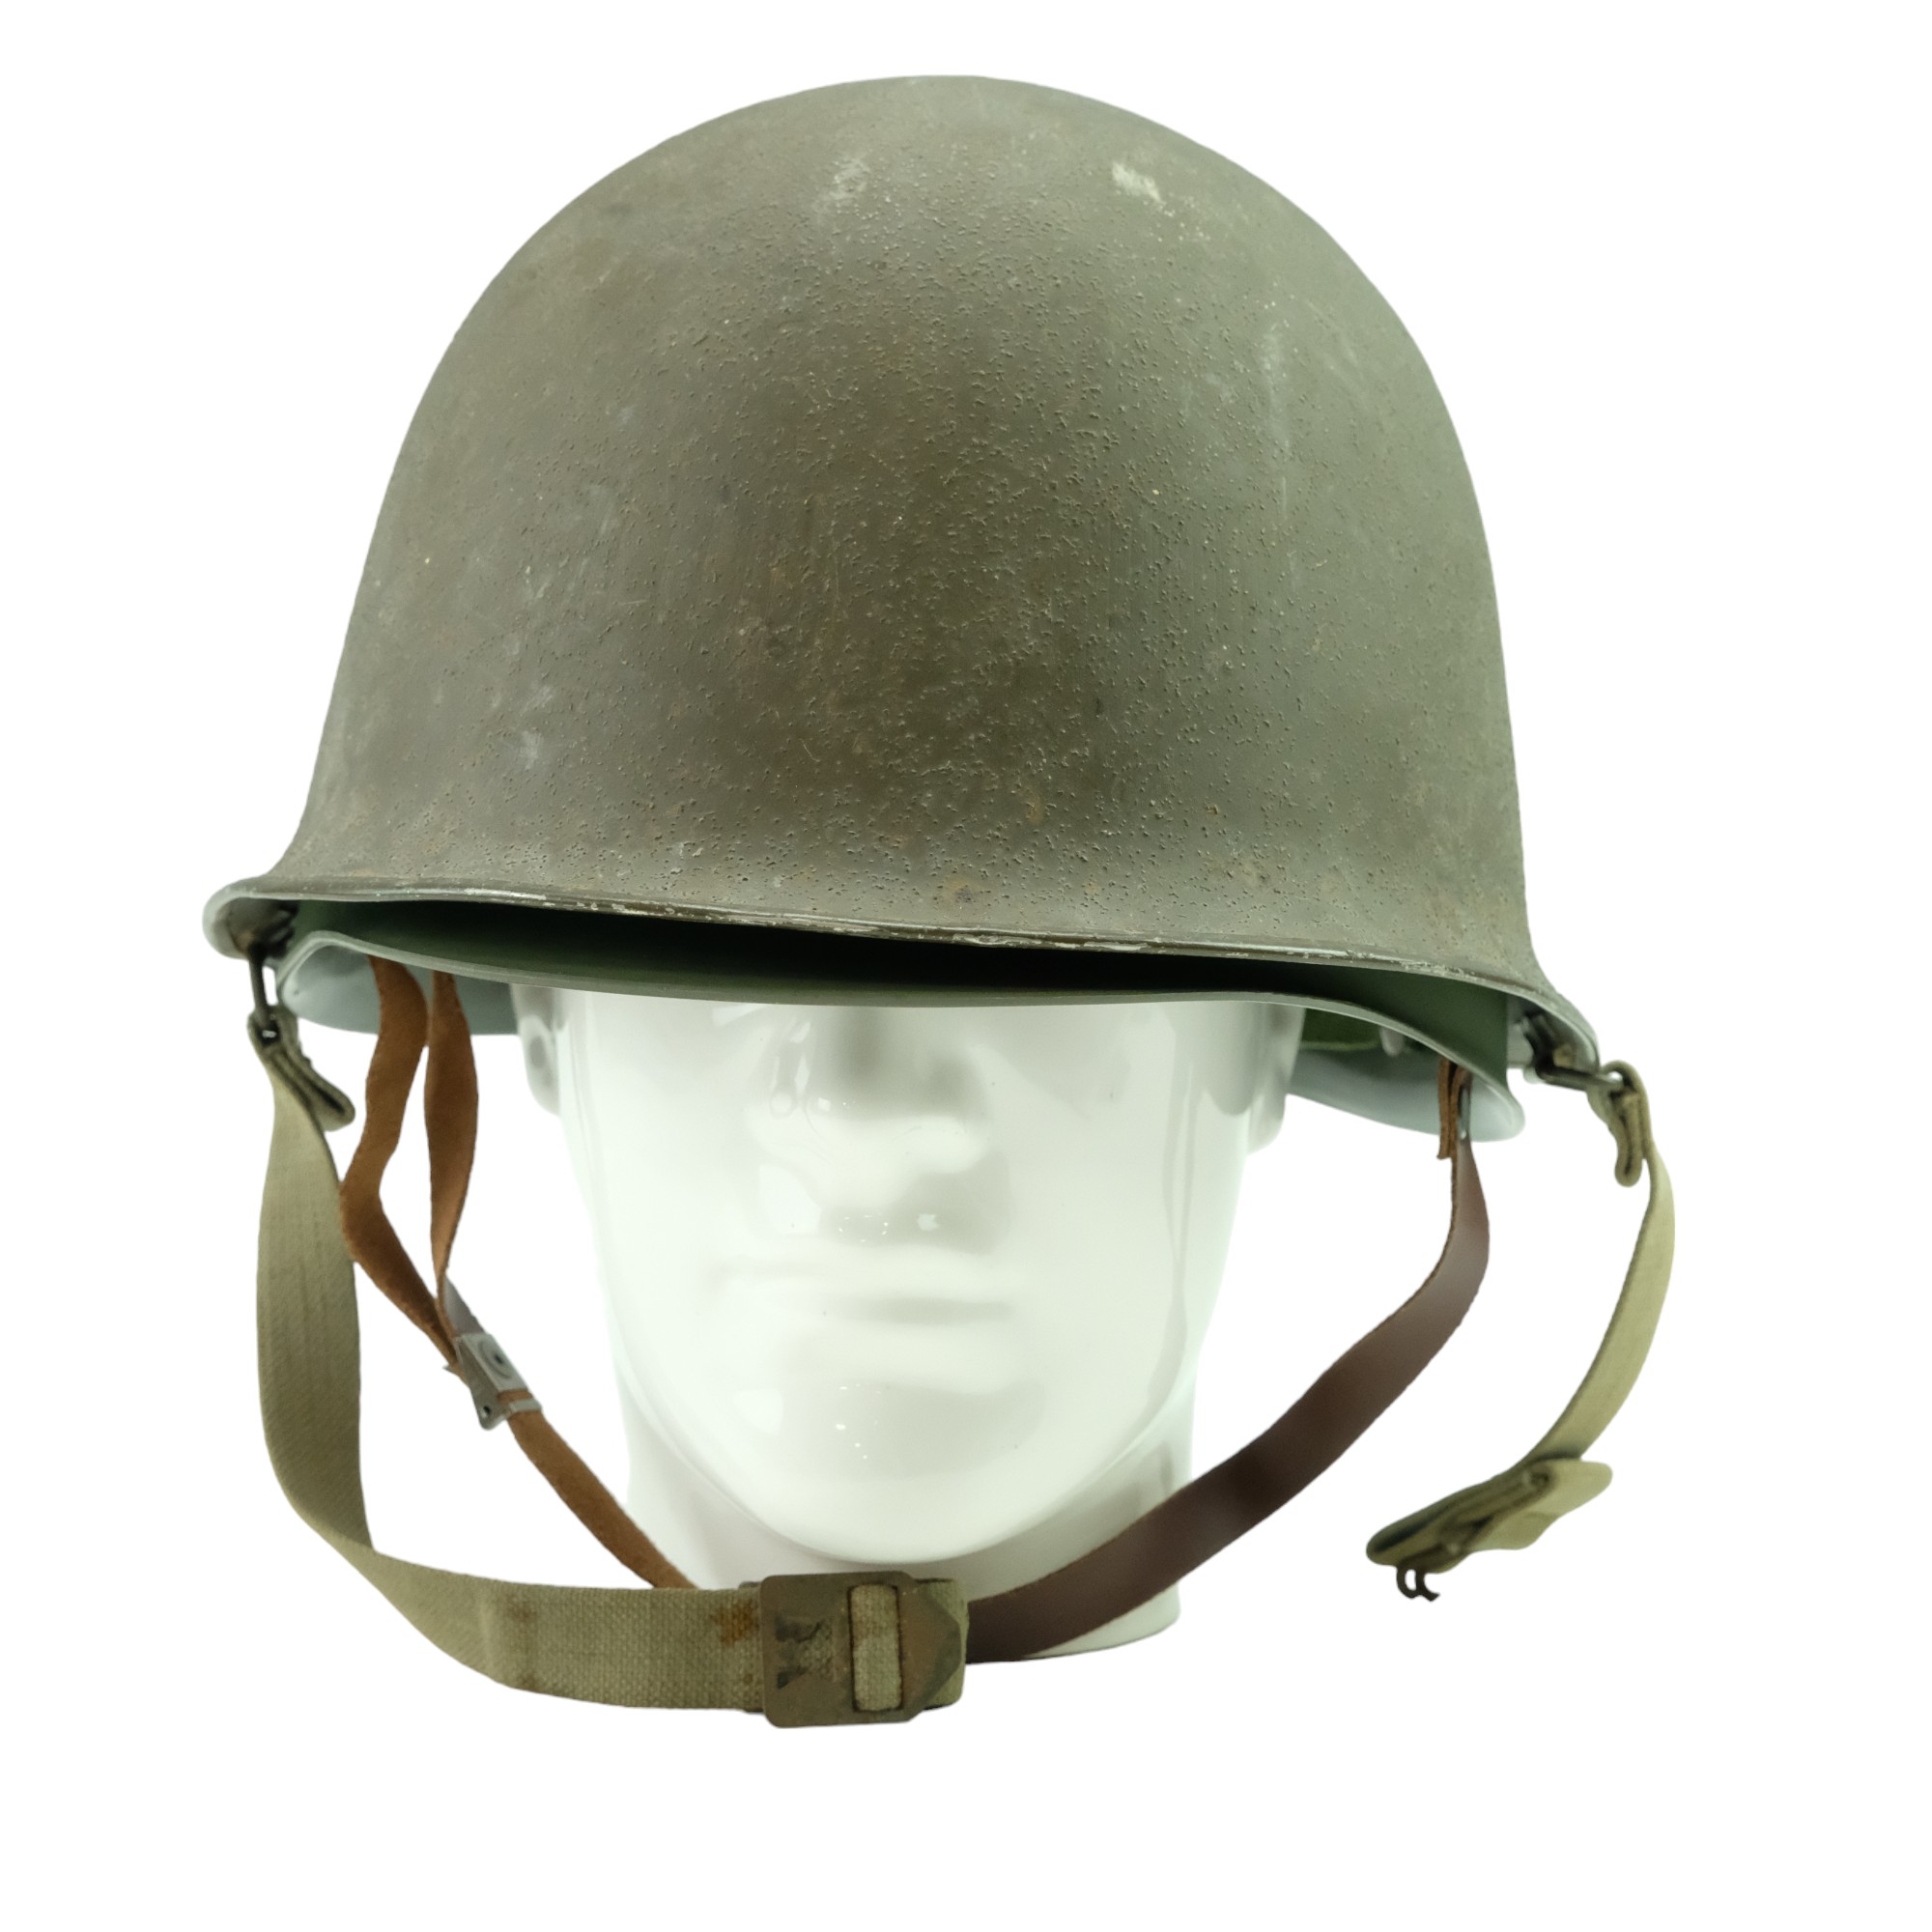 A French M1 style Helmet - Image 2 of 7